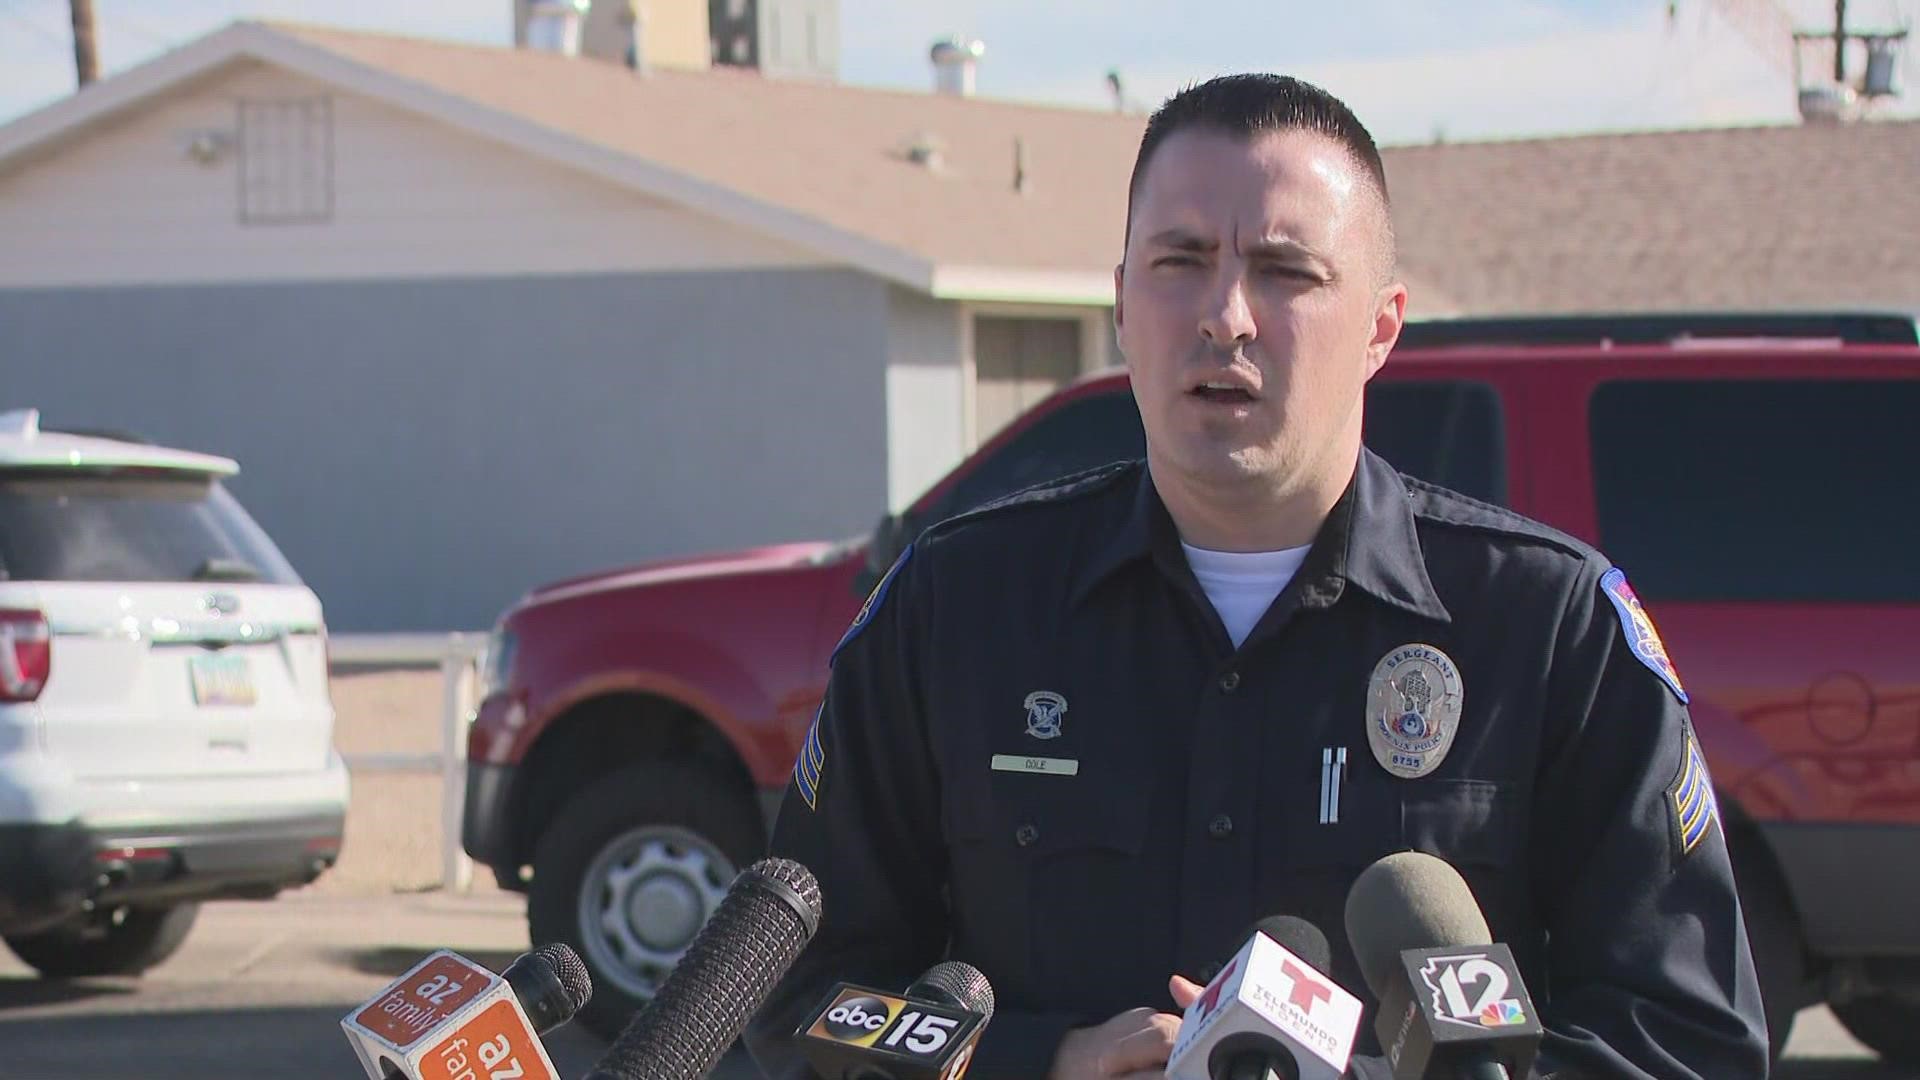 Officials from the Phoenix Police Department give an update on a shooting incident that occurred on Nov. 30 near Thomas Road and 59th Avenue.